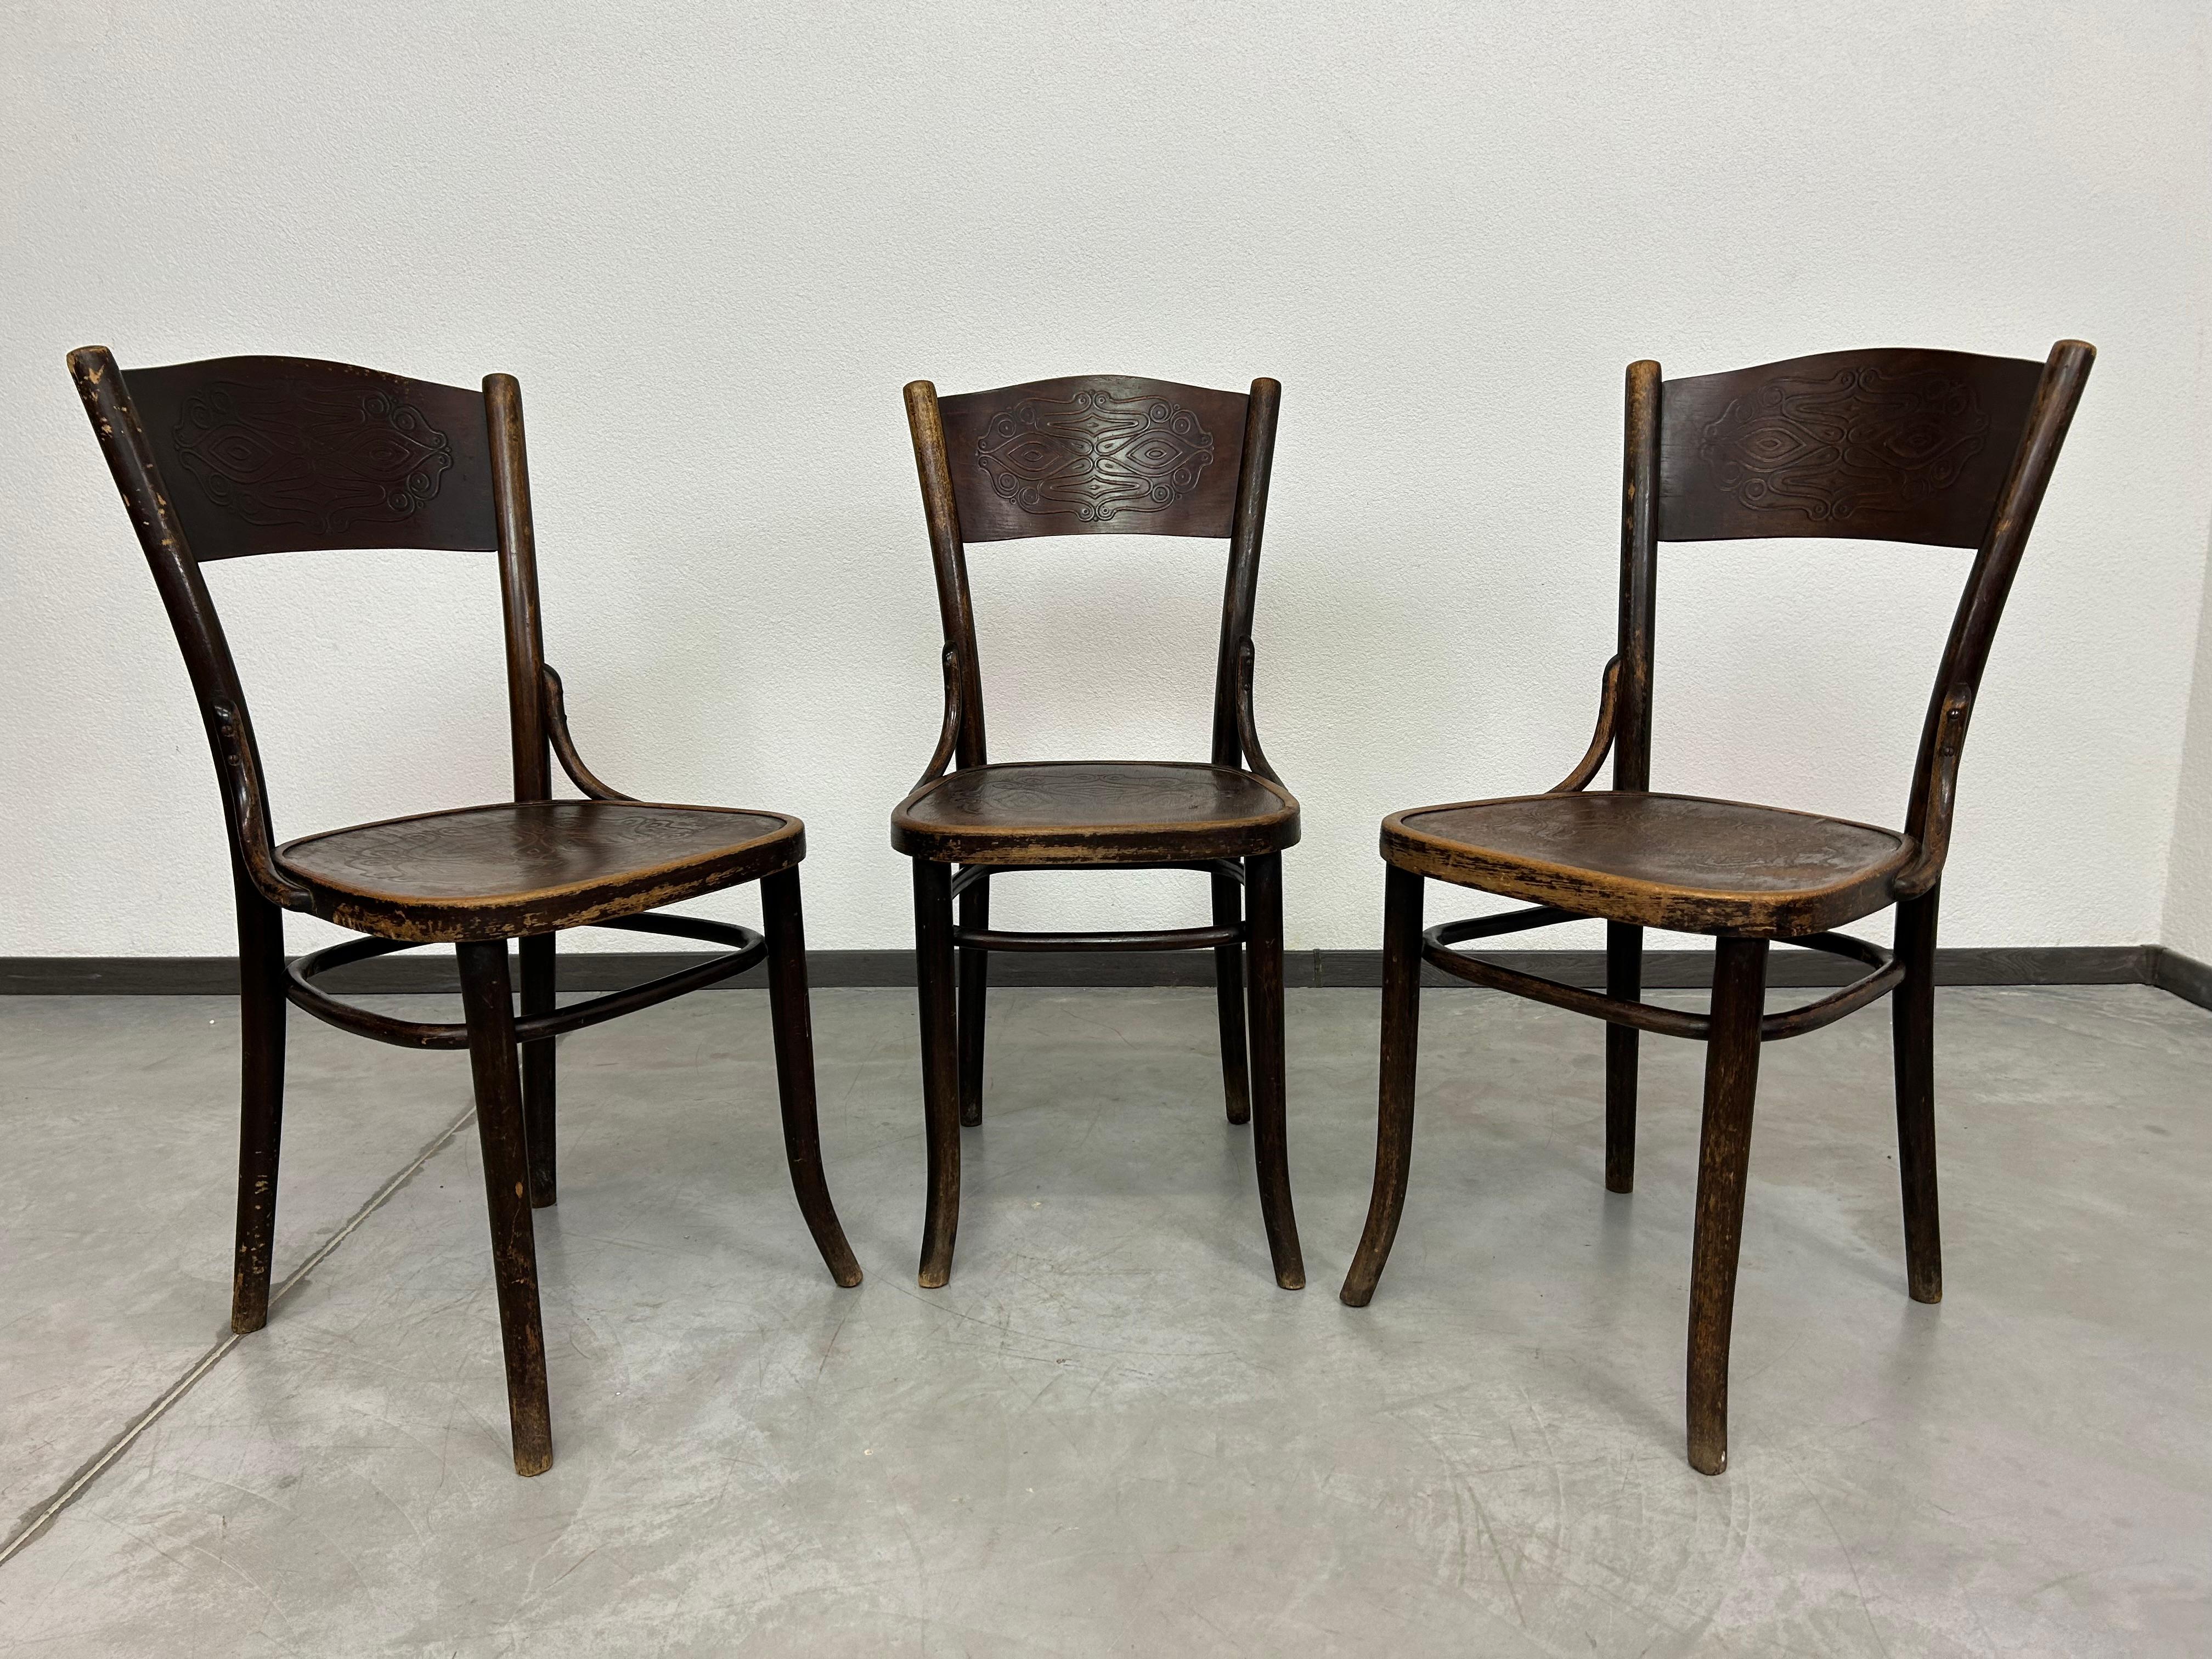 Set of 3 dining room chairs by J&J Kohn in originl vintage condition.